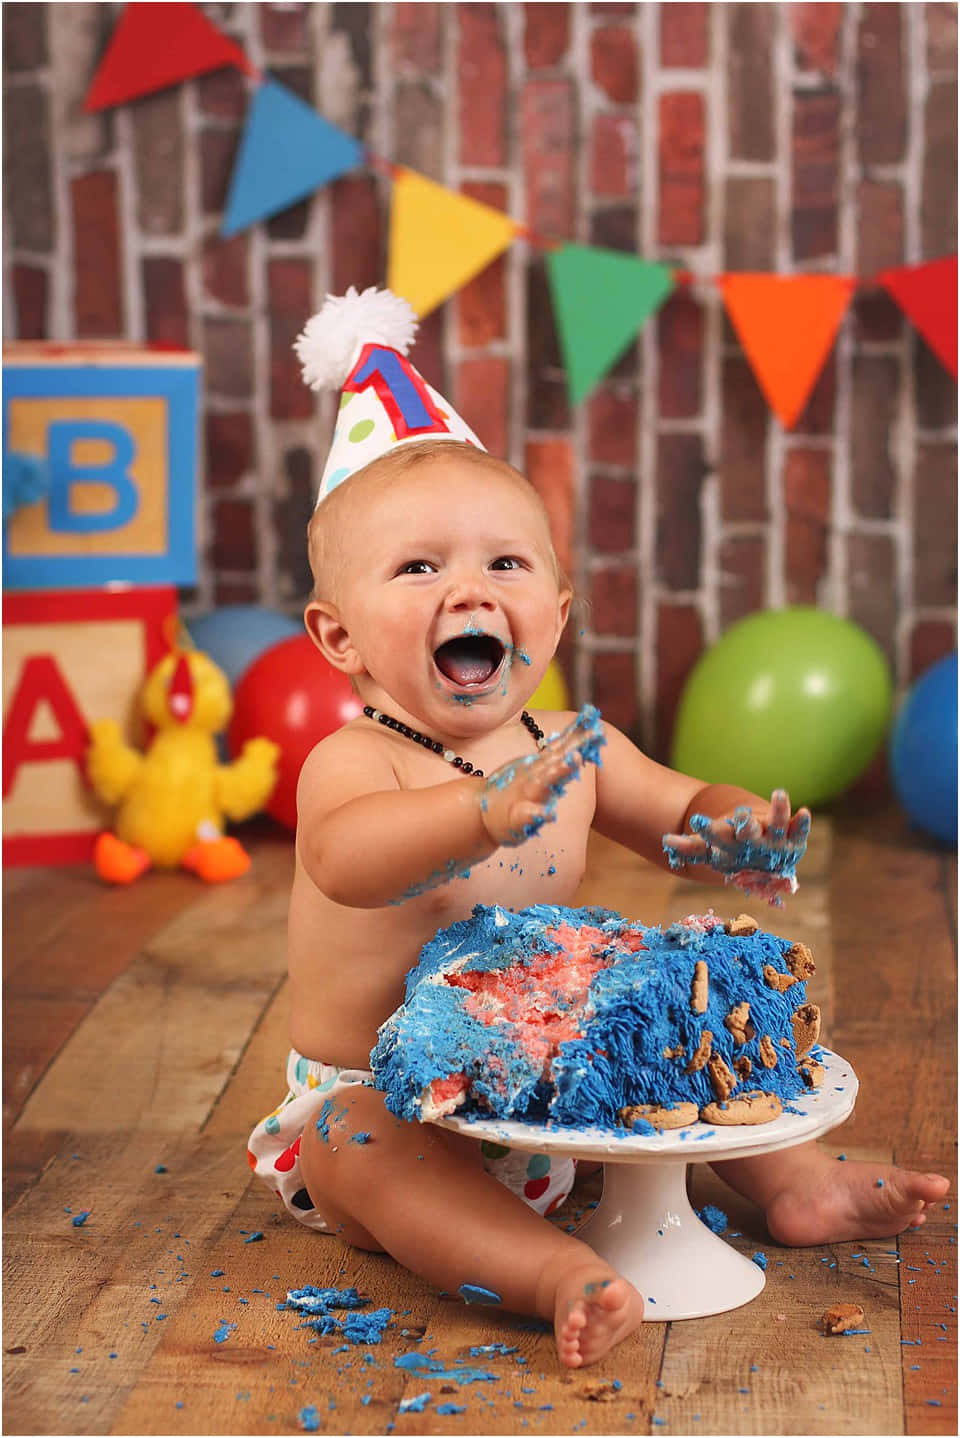 A Baby Is Eating Cake